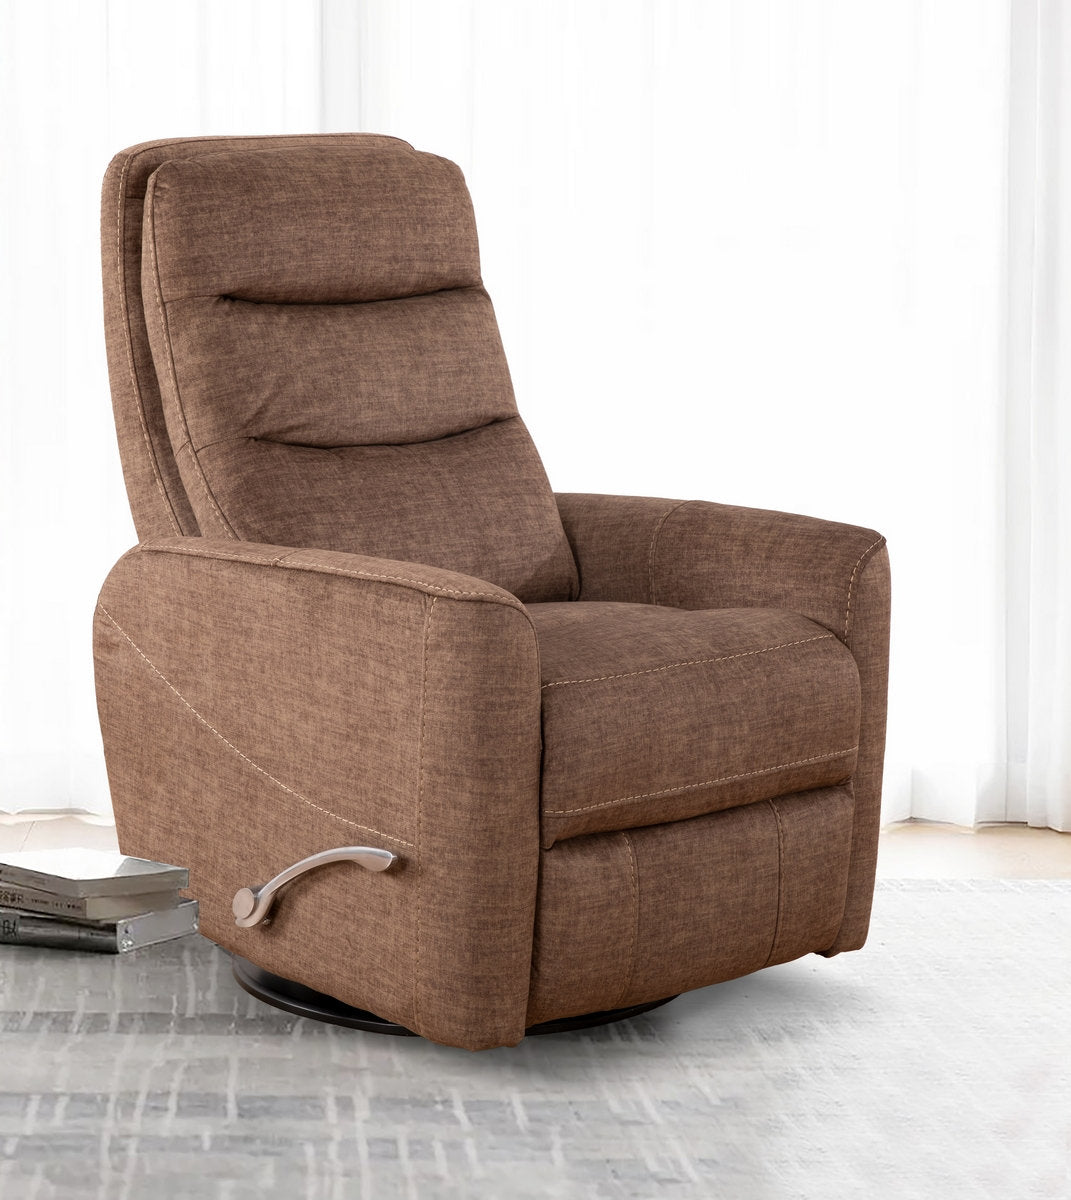 Recliner Chair Chocolate 6322